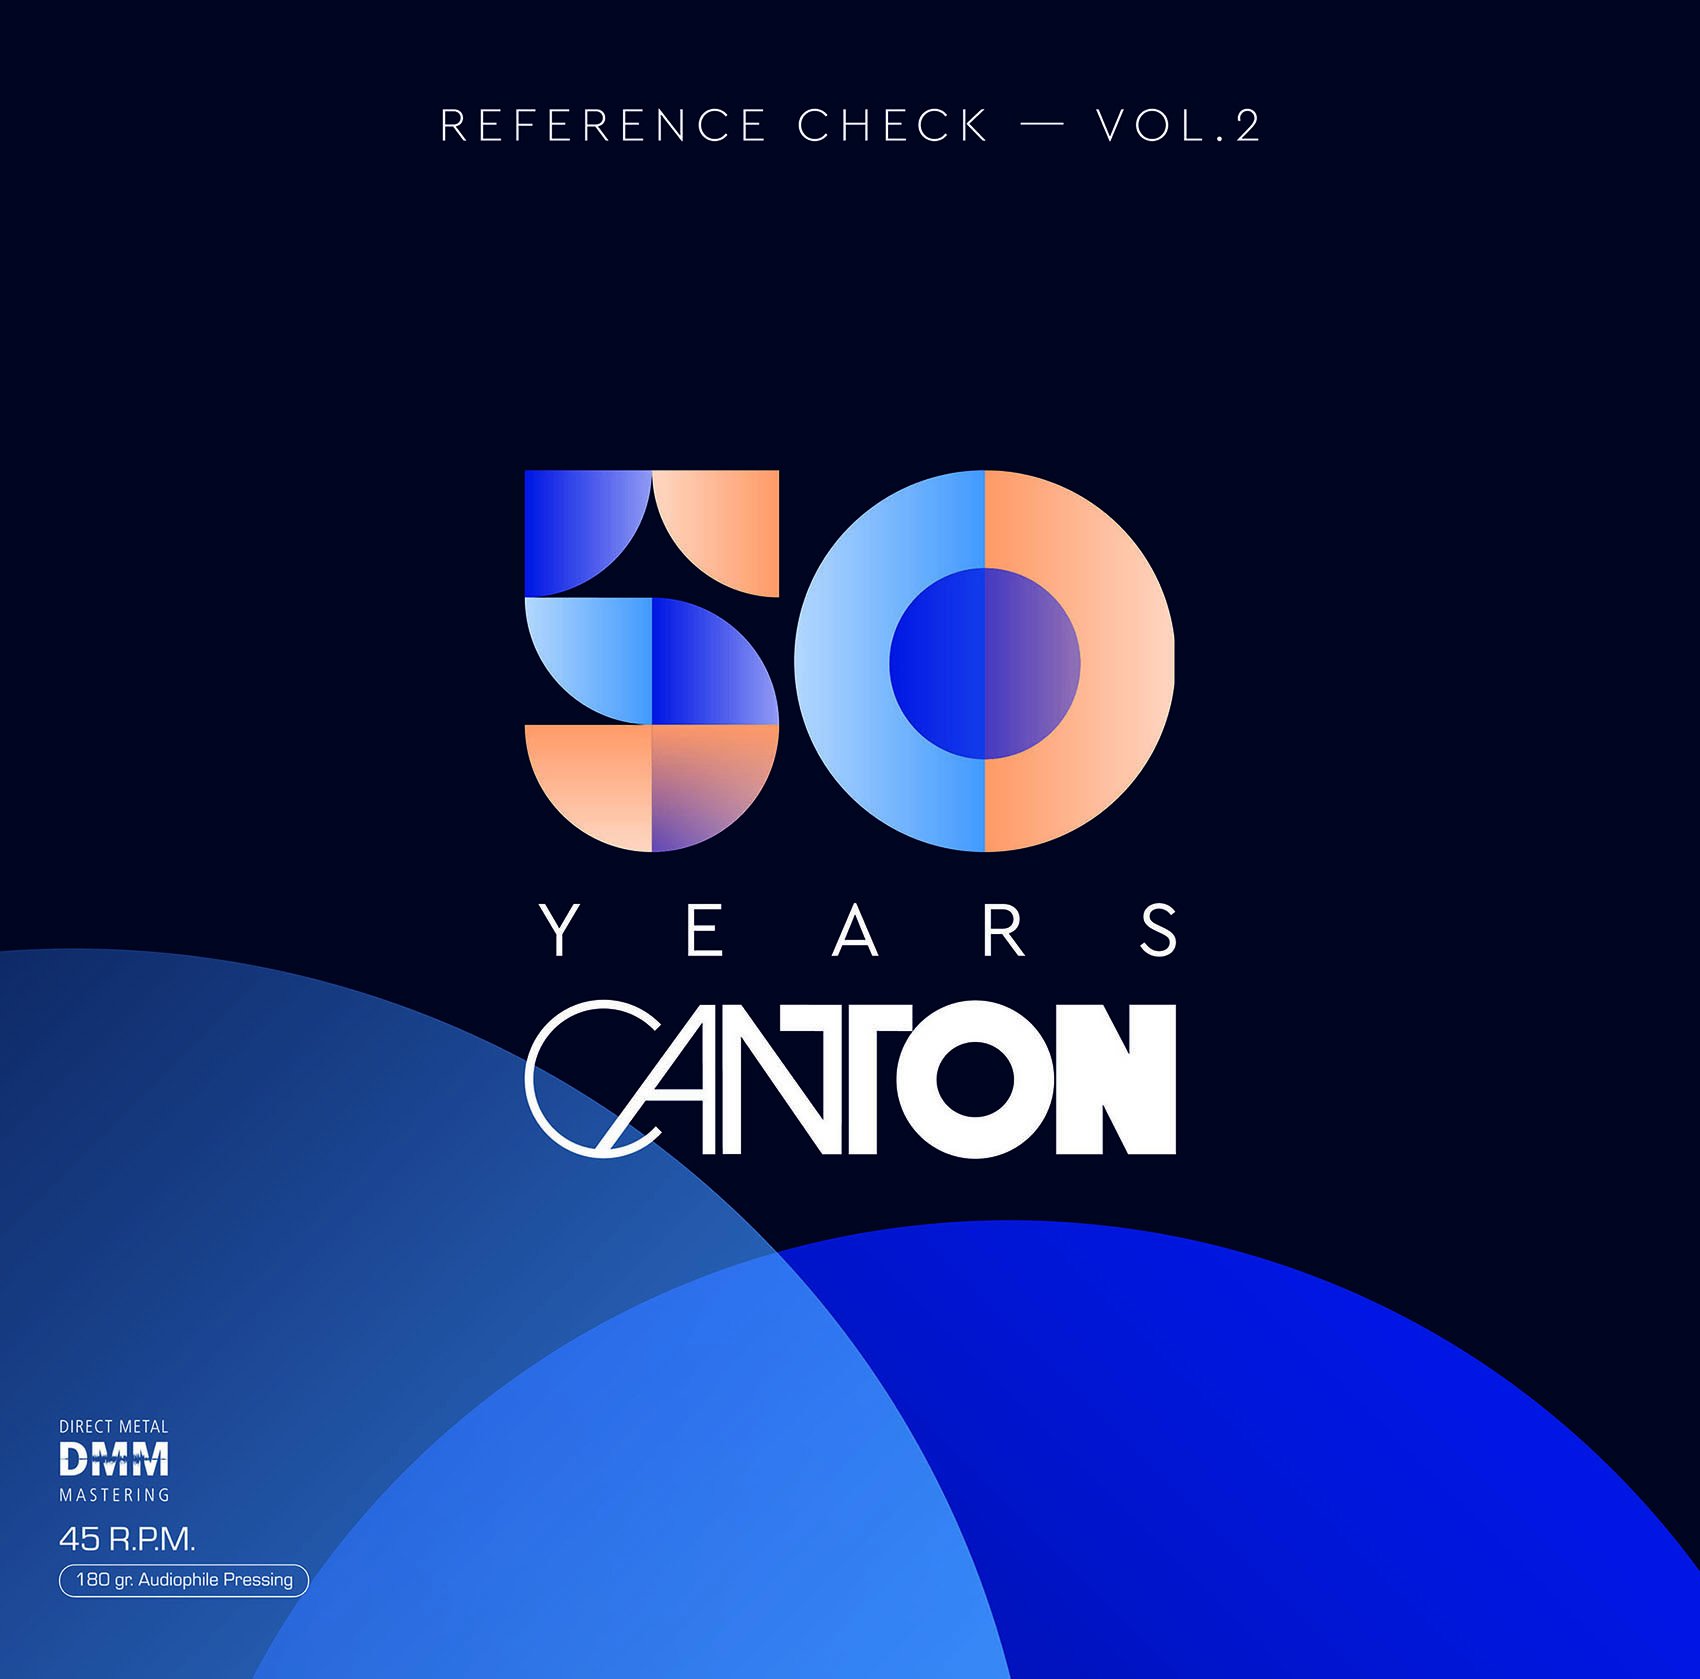 Canton LP - Reference Check Vol. II